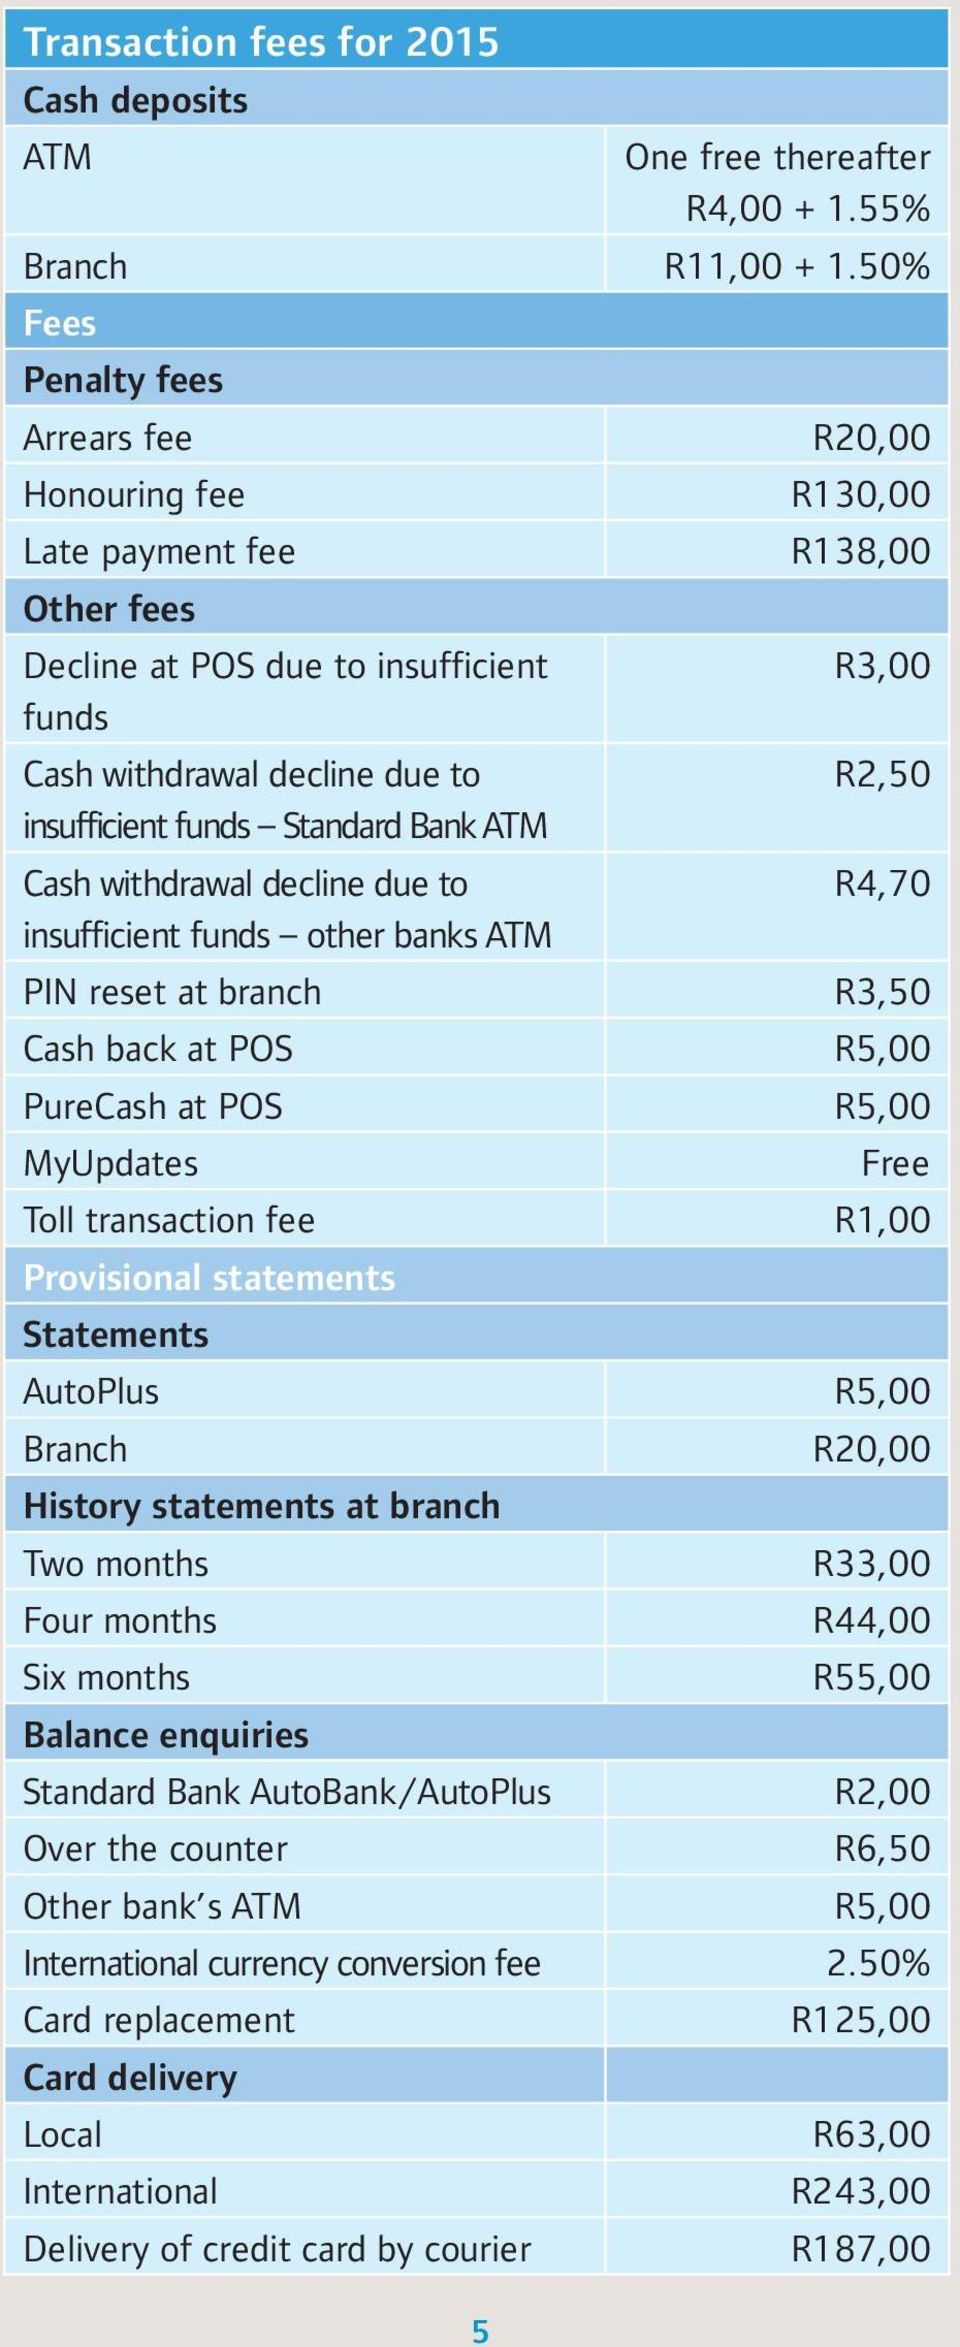 funds Standard Bank ATM Cash withdrawal decline due to R4,70 insufficient funds other banks ATM PIN reset at branch R3,50 Cash back at POS R5,00 PureCash at POS R5,00 MyUpdates Free Toll transaction